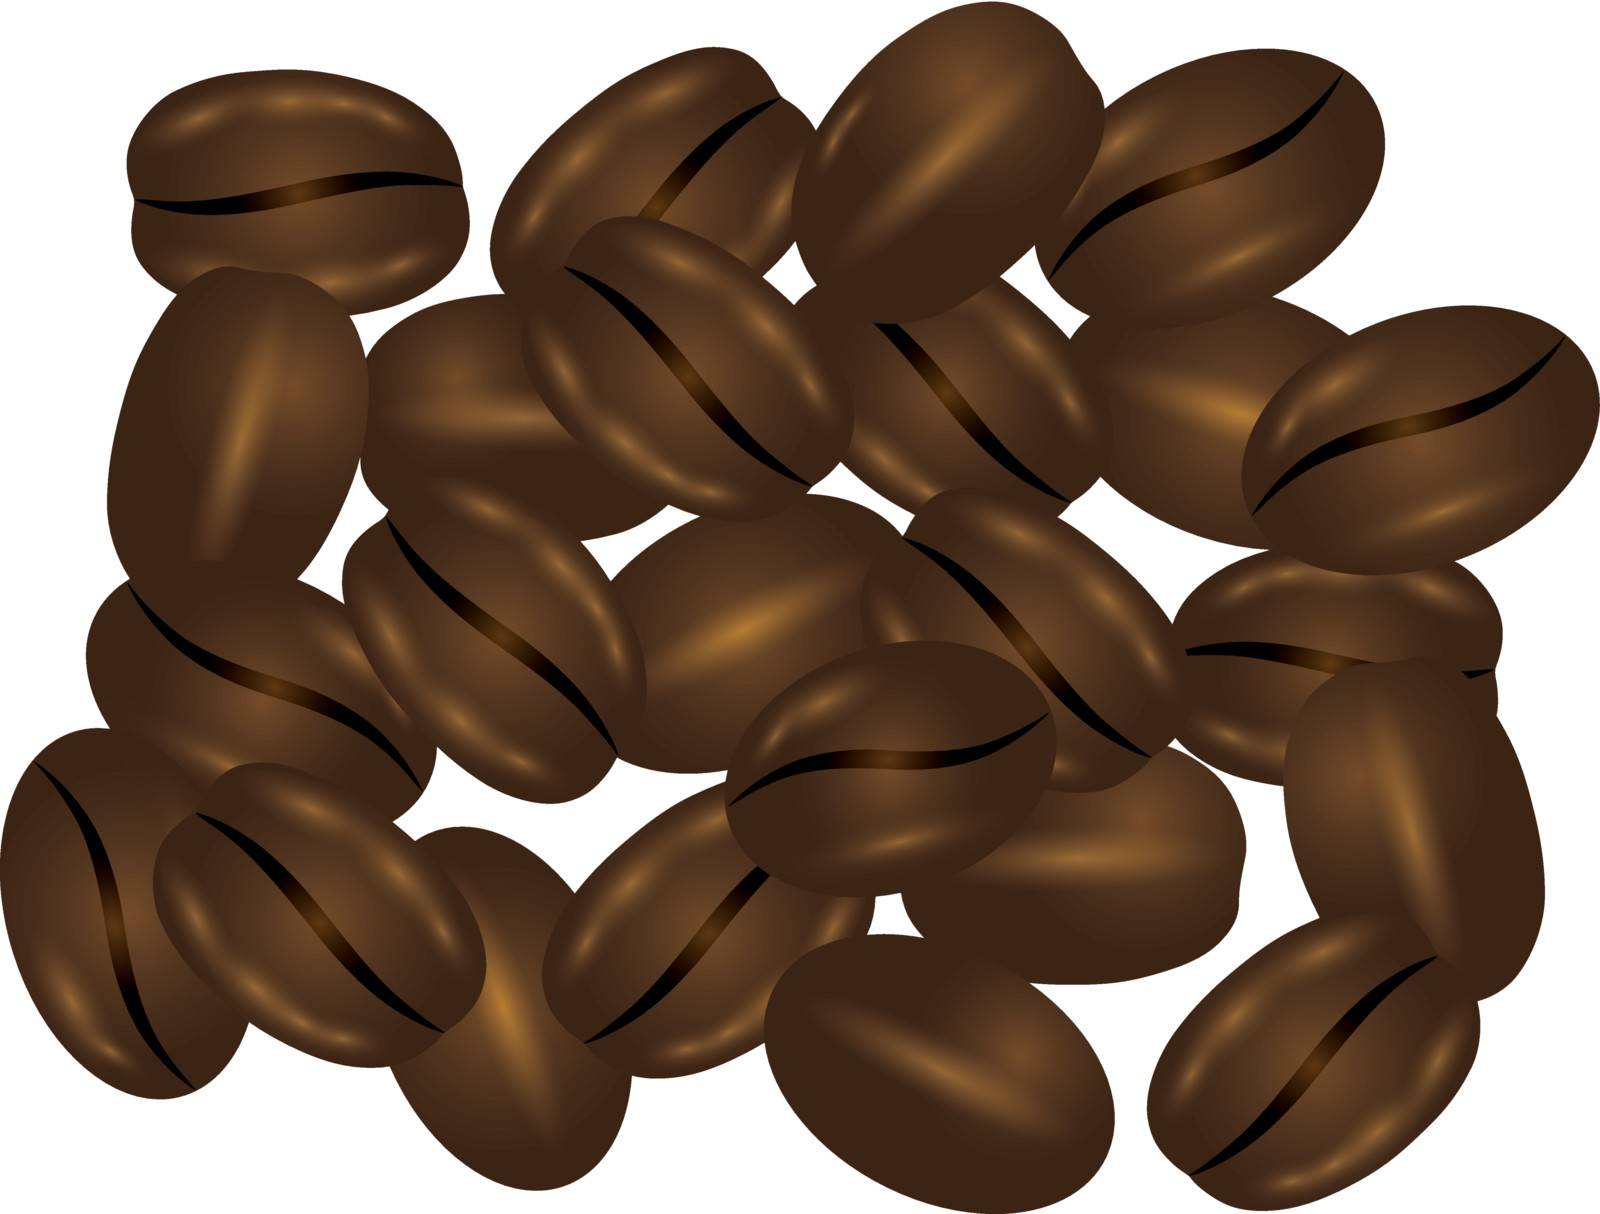 Coffee Beans Illustration by jpldesigns